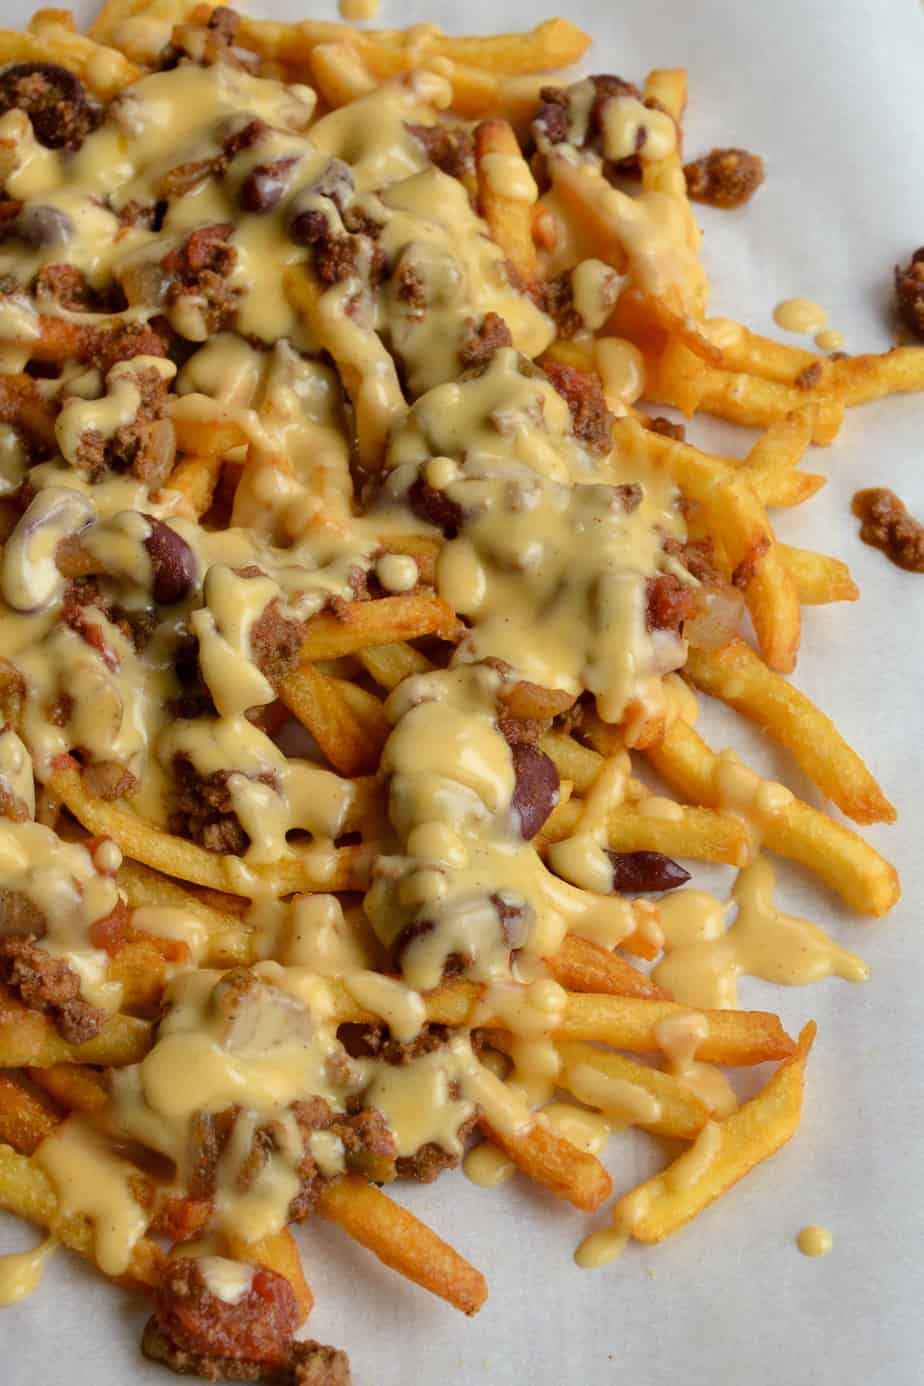 Scrumptious Chili Cheese Fries made with a hearty thick beef chili and topped with a lusciously creamy cheddar cheese sauce